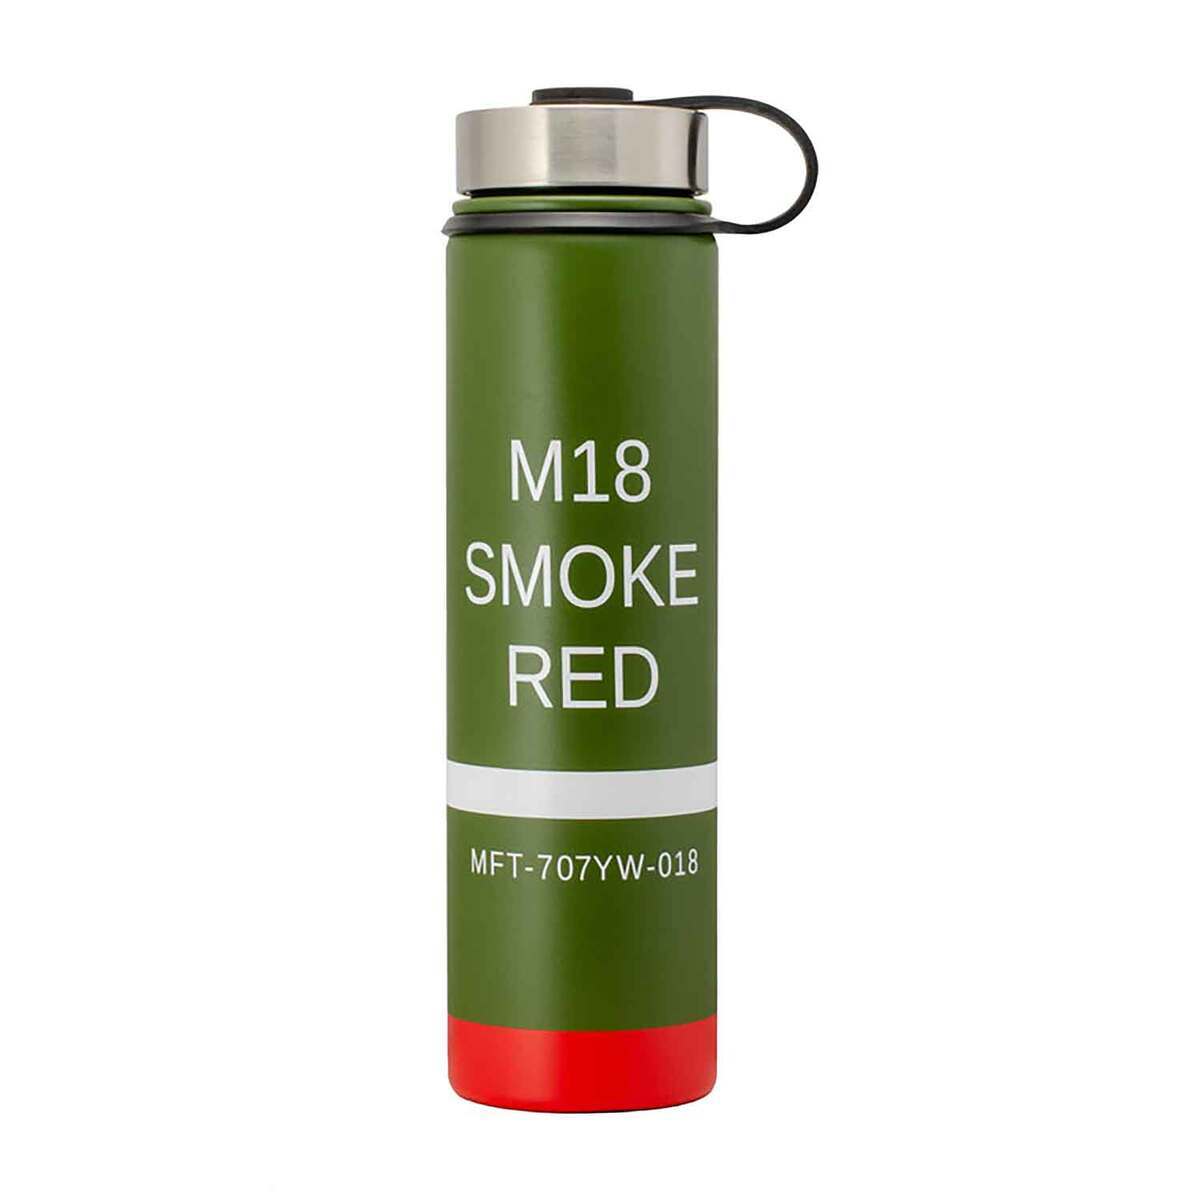 Mission First Tactical MFT DM18R-25 24 oz M18 Evac Tumbler with Twist on Top Red Smoke